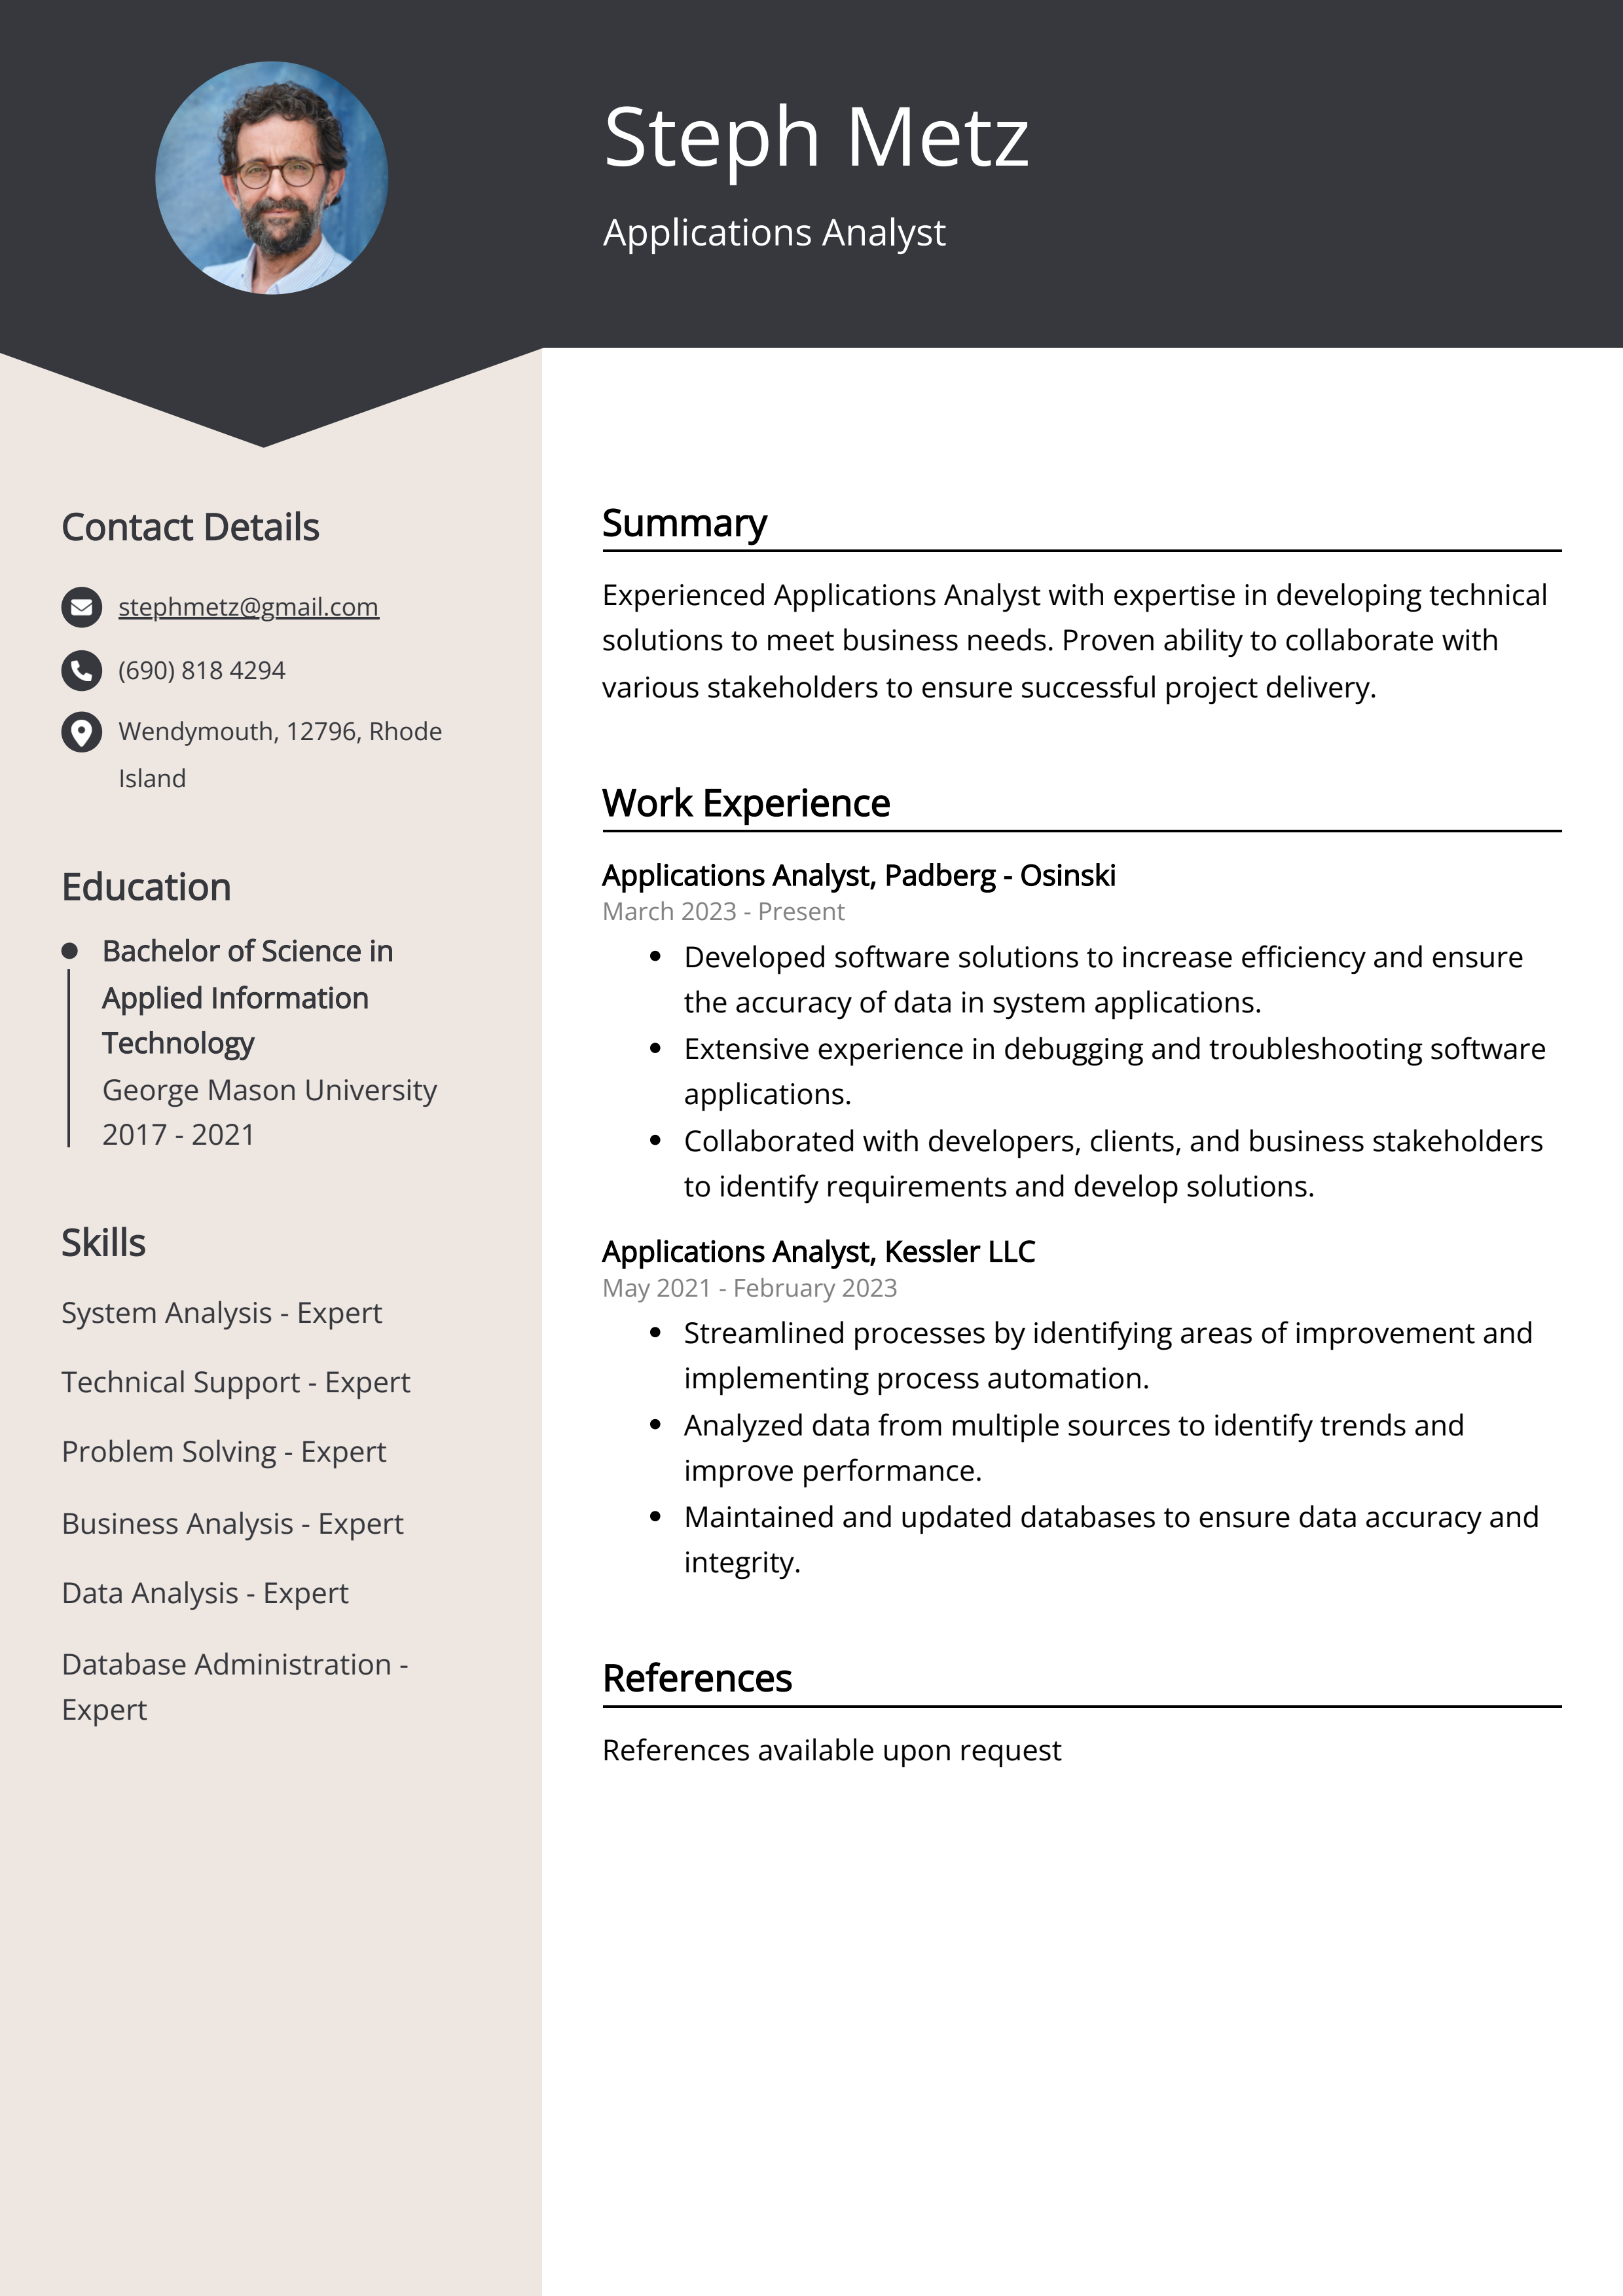 Applications Analyst CV Example